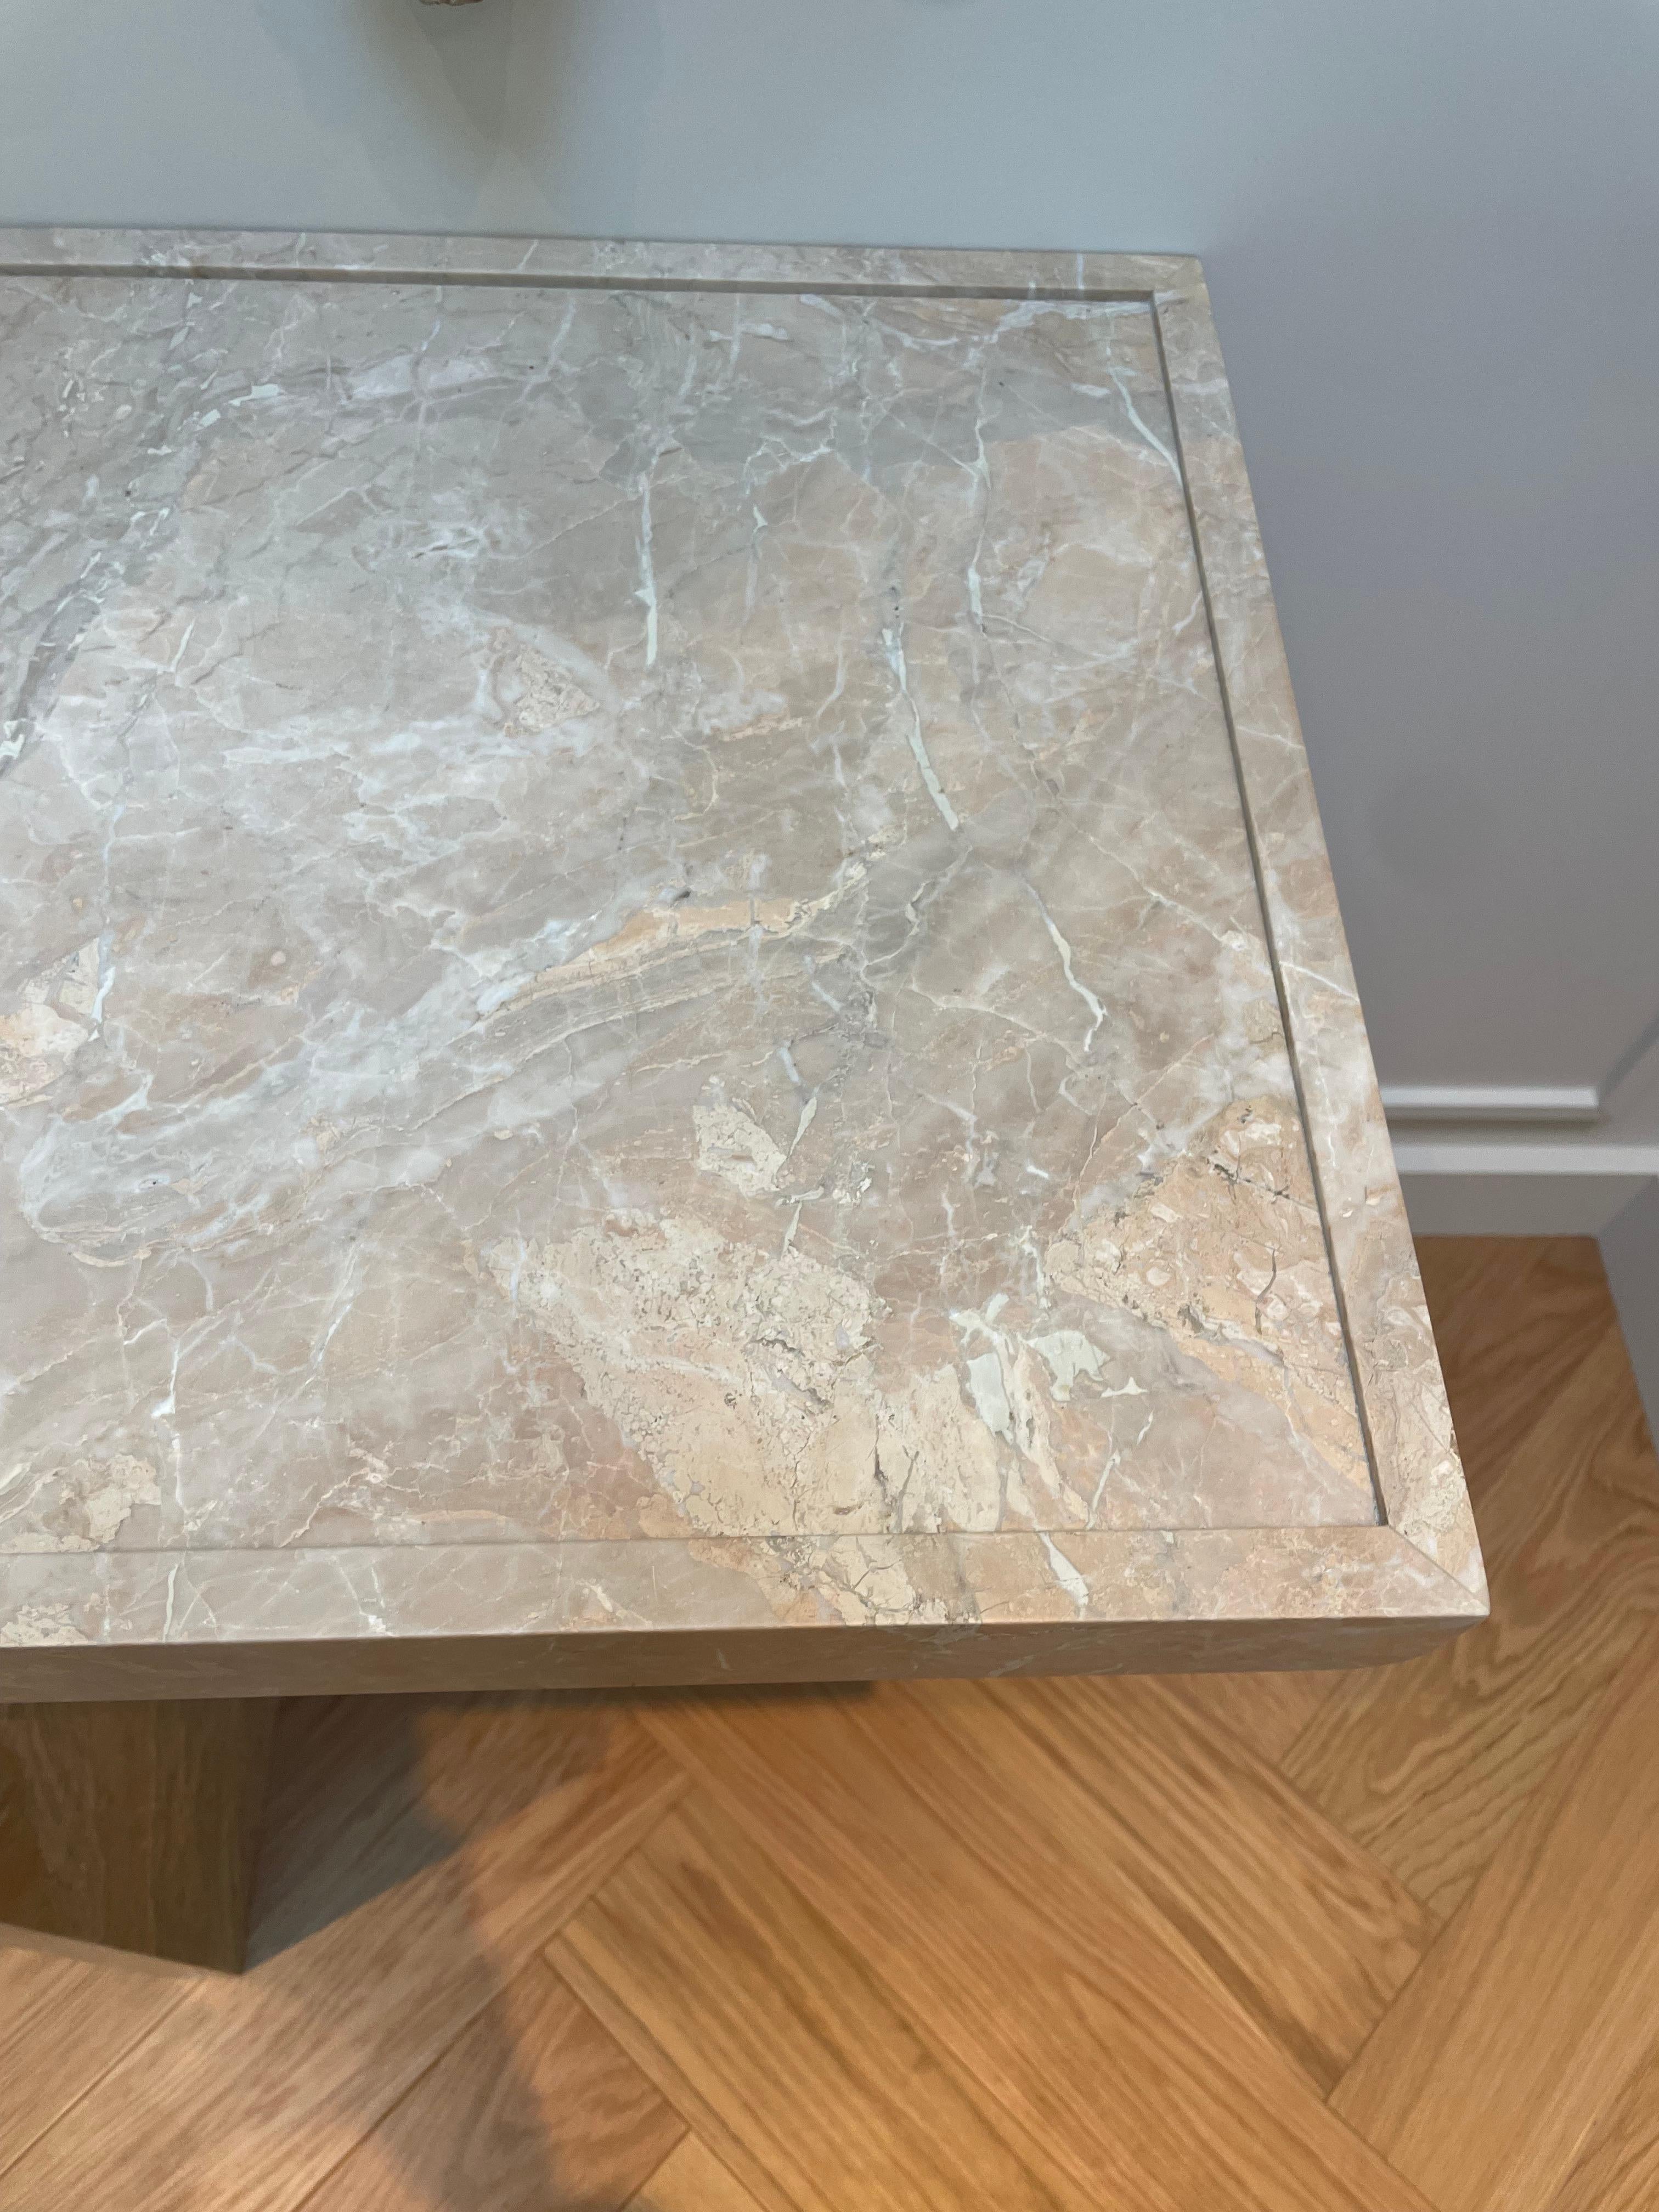 Console Table in Blushed-toned pink Marble  In Excellent Condition For Sale In West Hollywood, CA